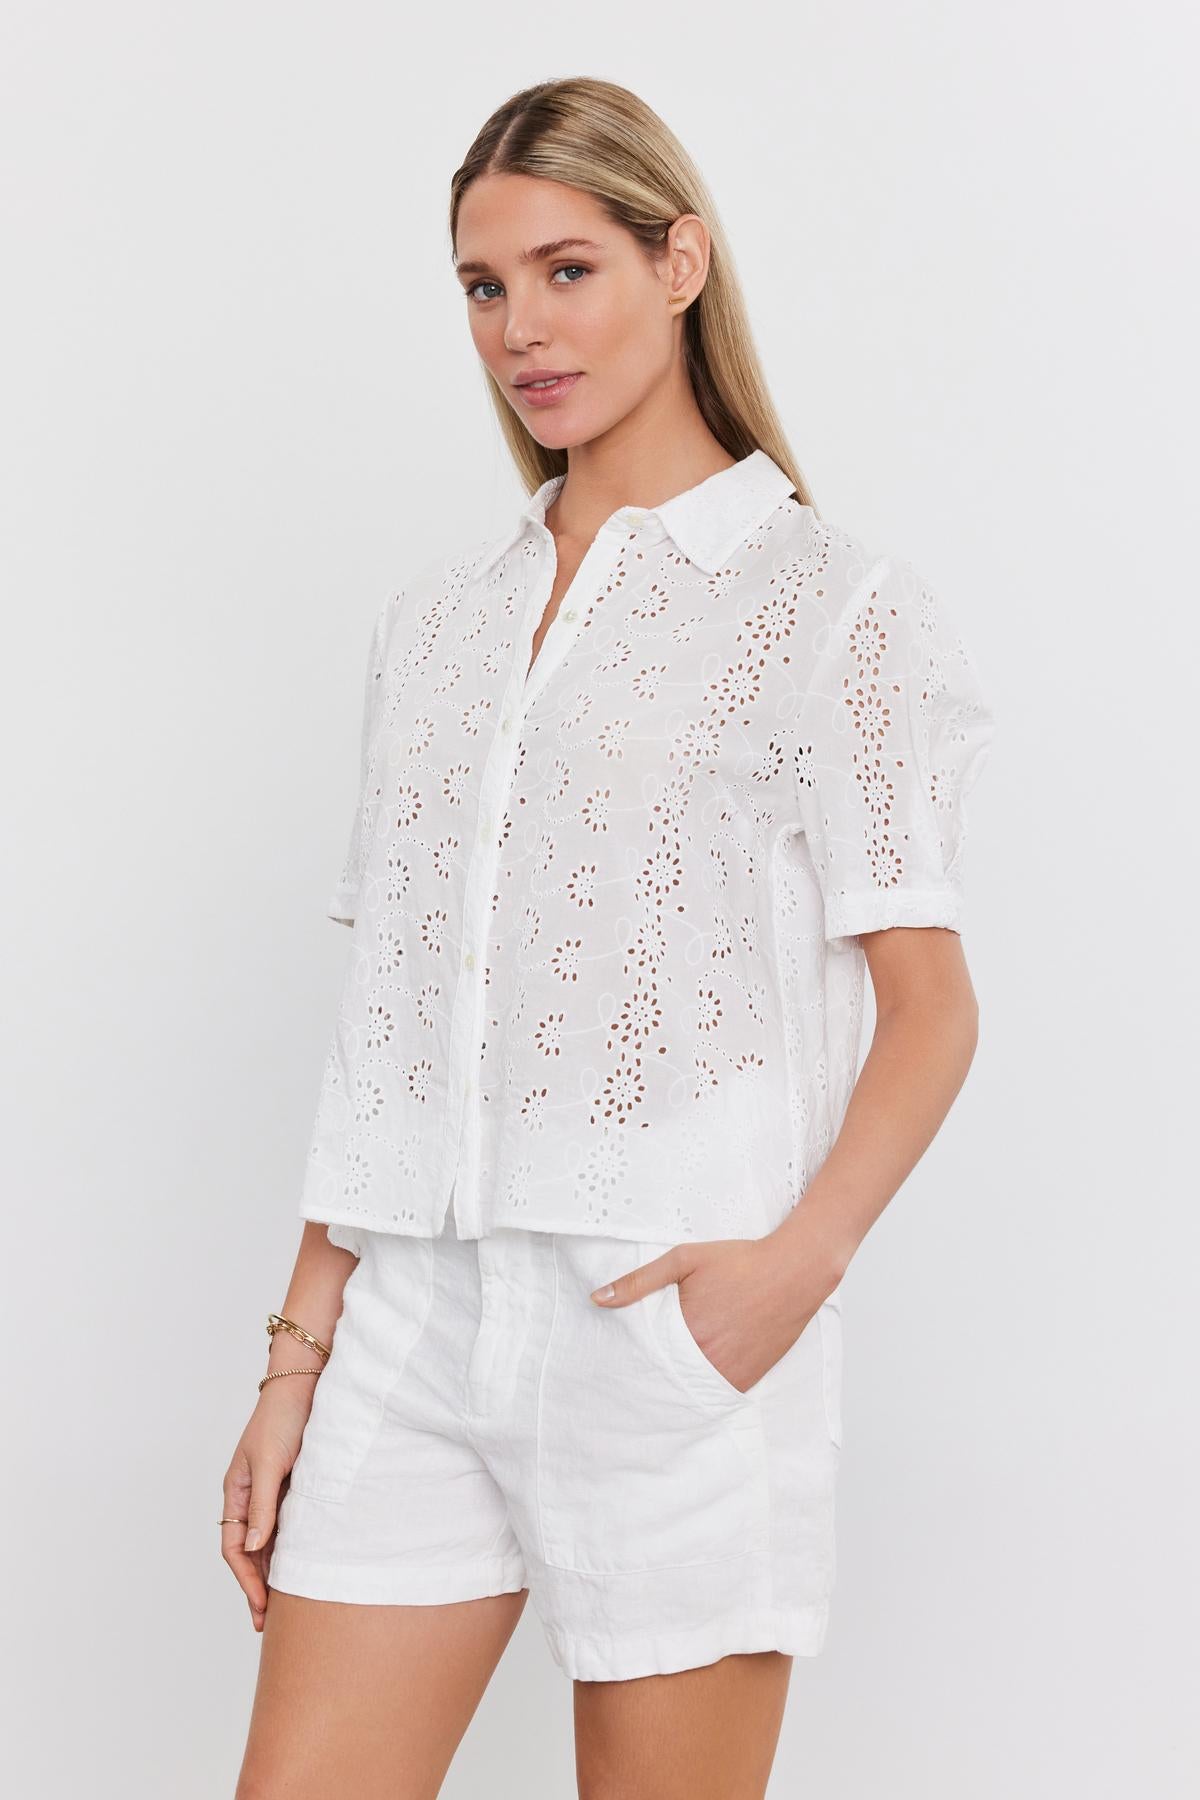 Woman in a white "OLIVIA BLOUSE" by Velvet by Graham & Spencer with detachable camisole and shorts posing against a plain background.-36918784884929